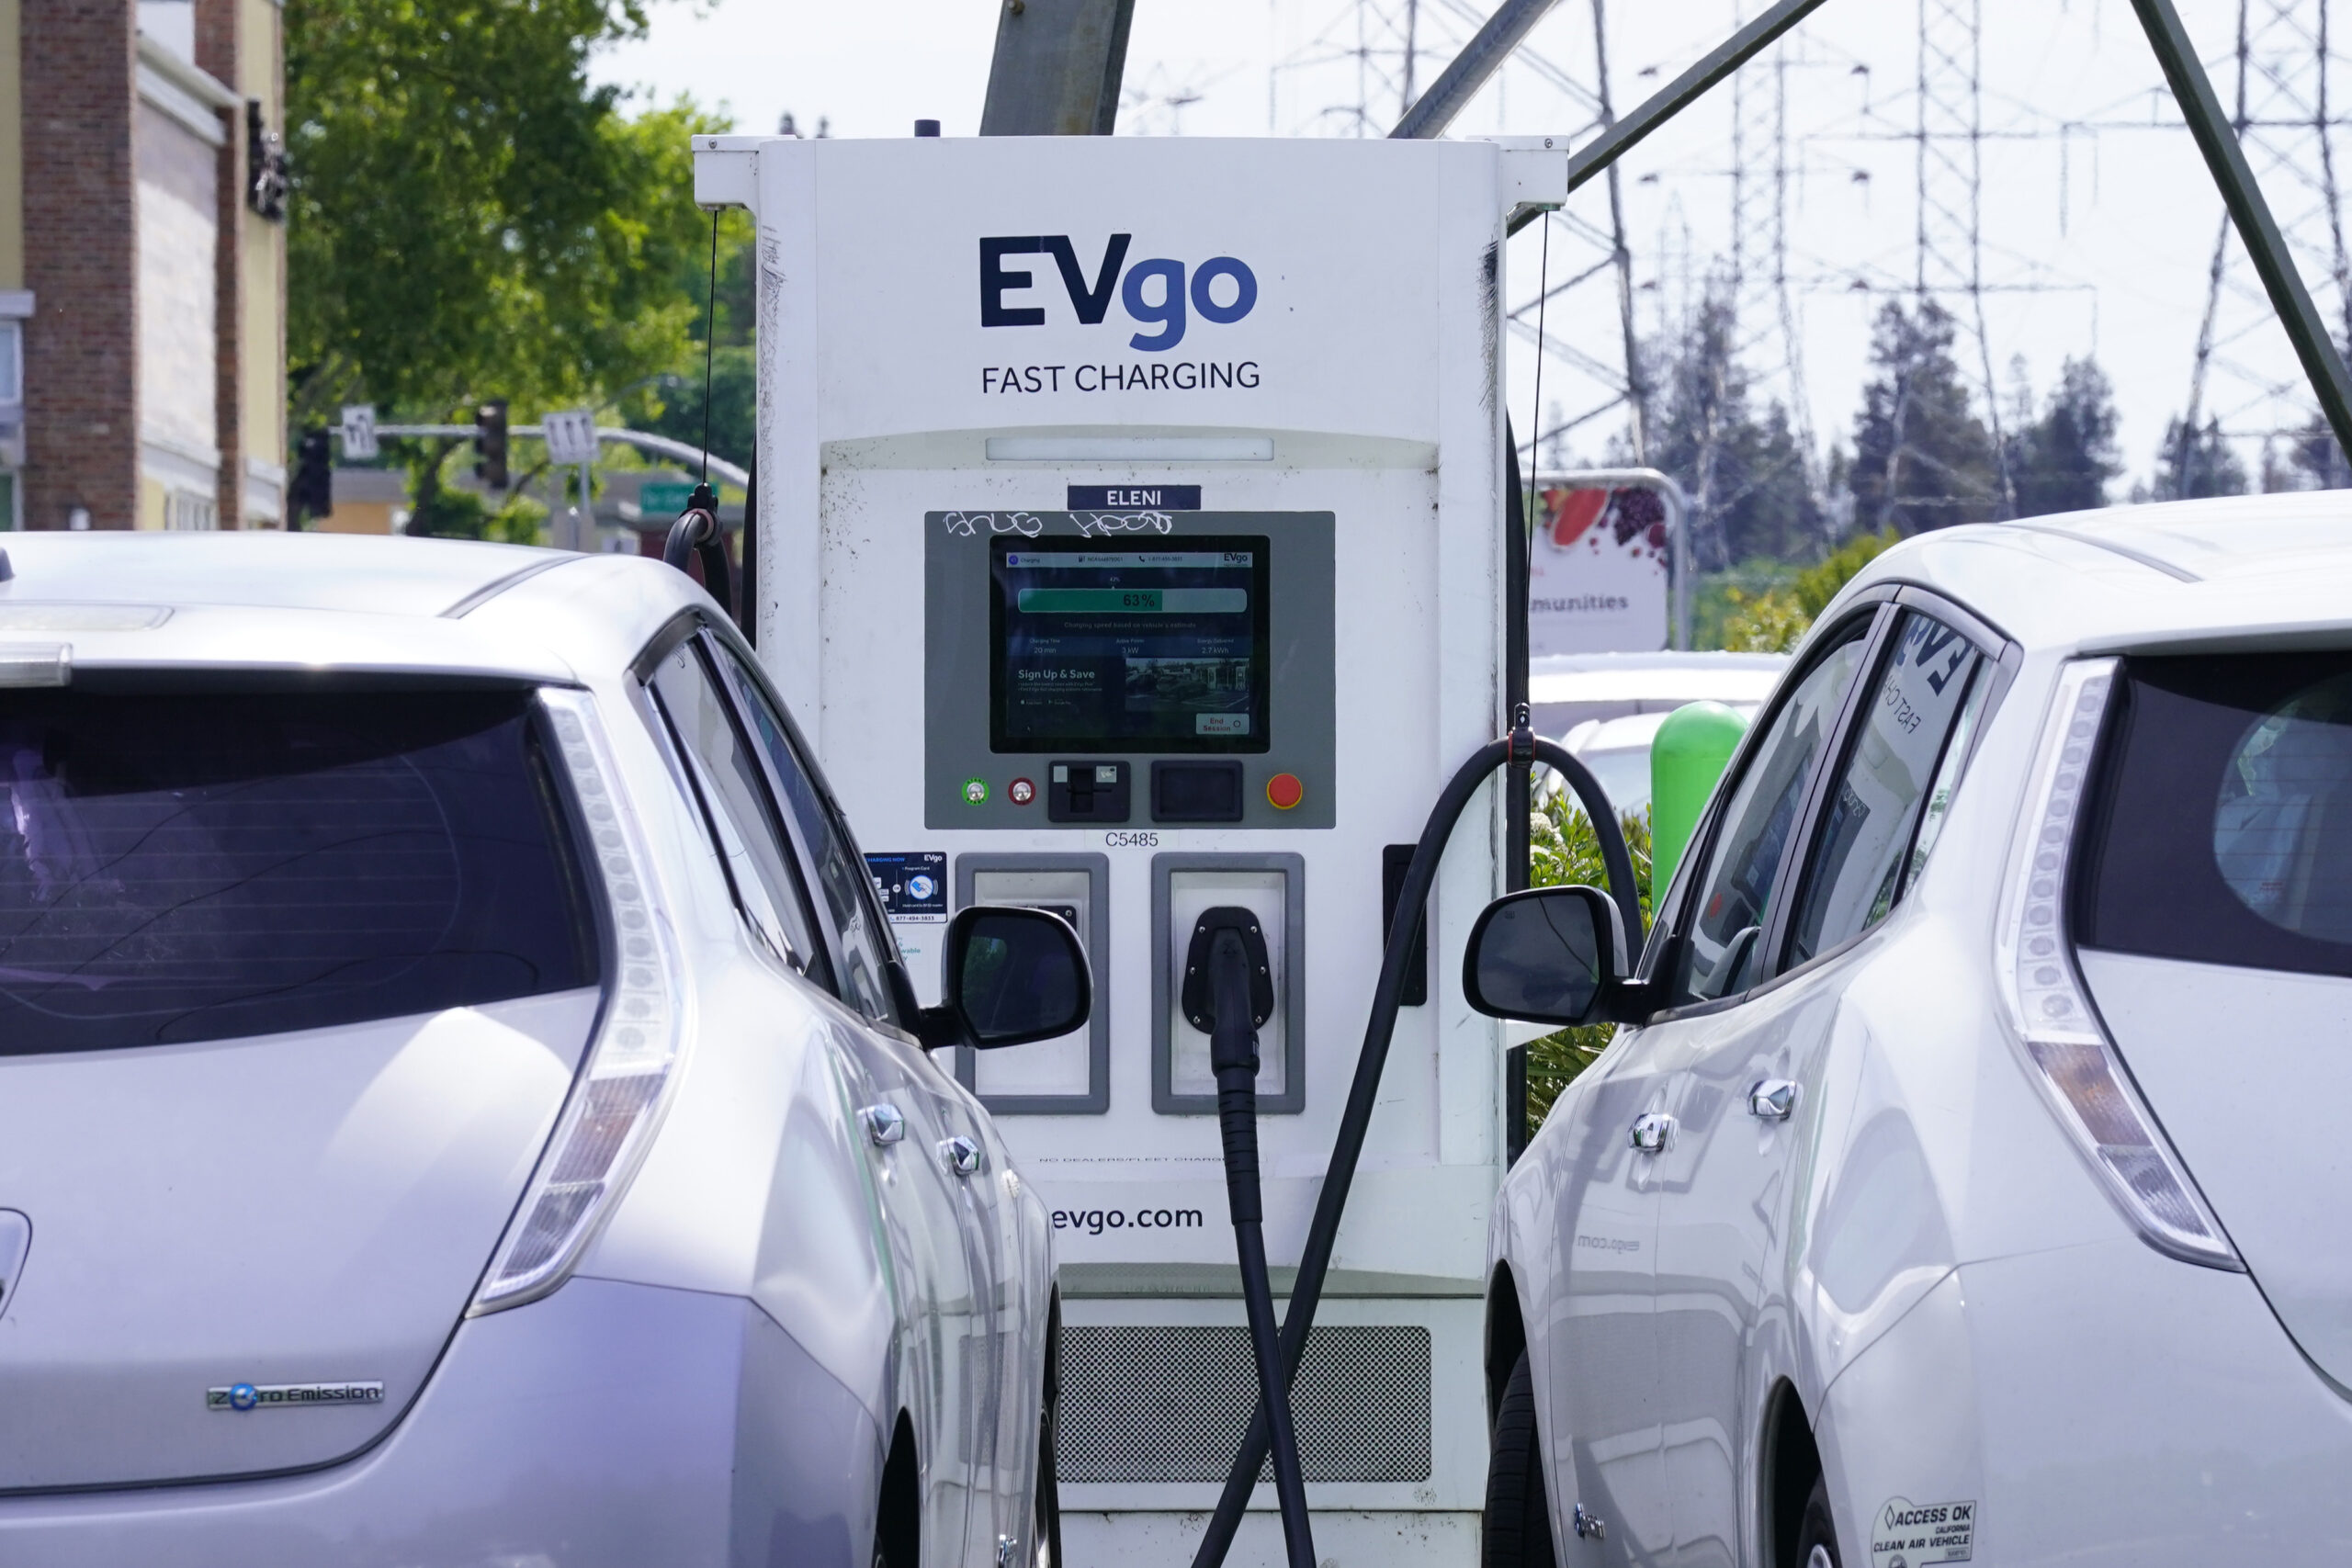 Wisconsin to build network of fast-charging stations for electric vehicles, but supply chain issues may slow transition